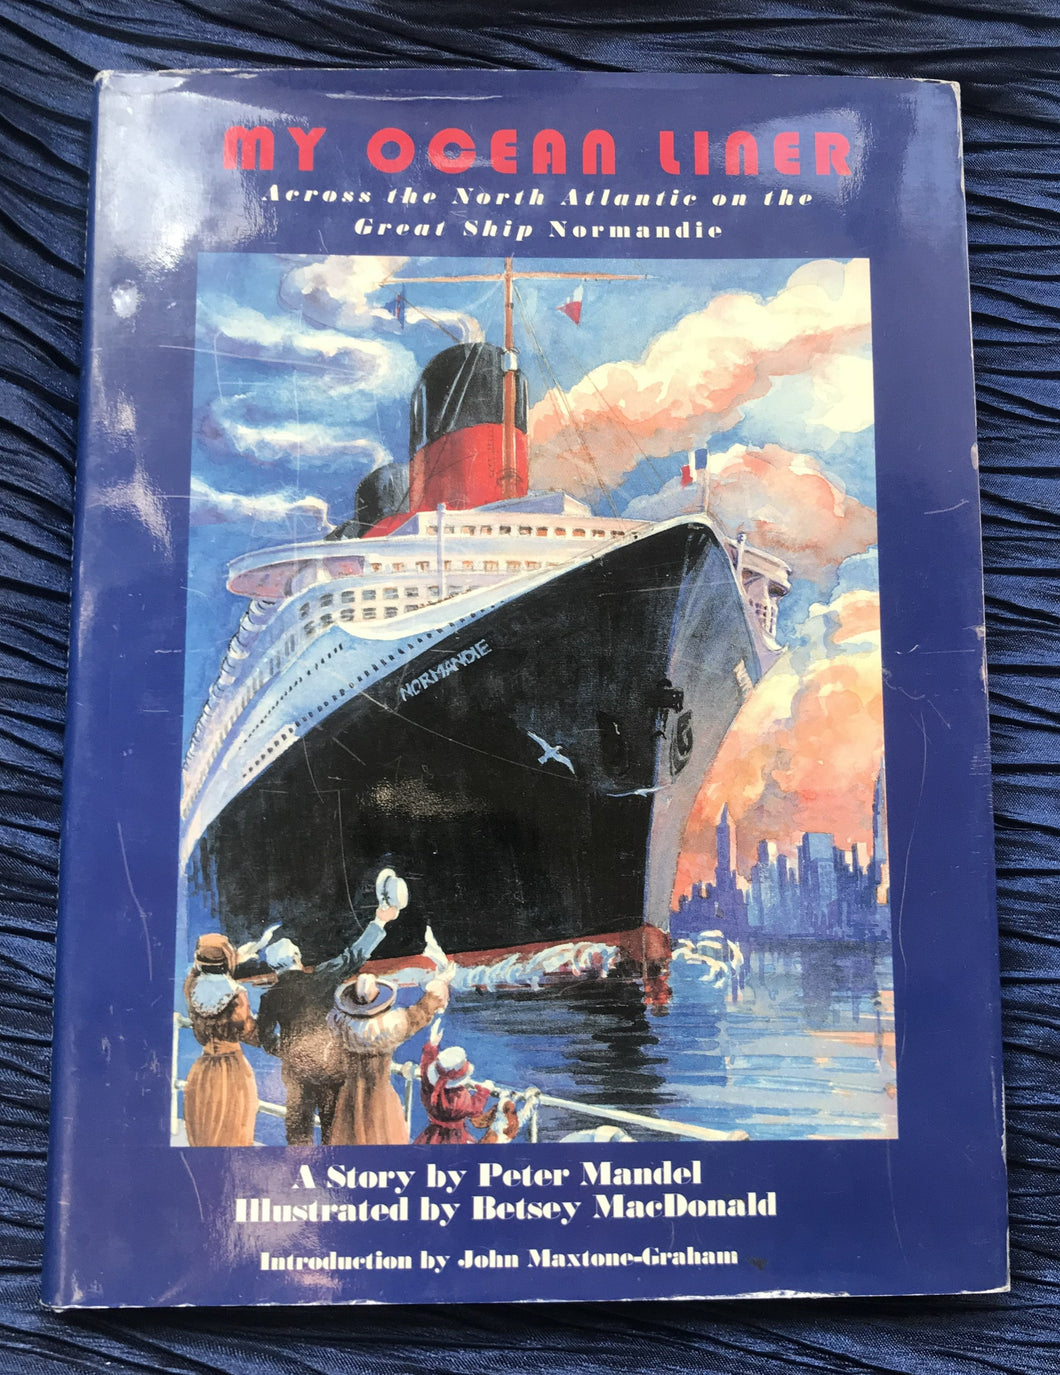 My Ocean Liner: Across the North Atlantic on the Great Ship NORMANDIE